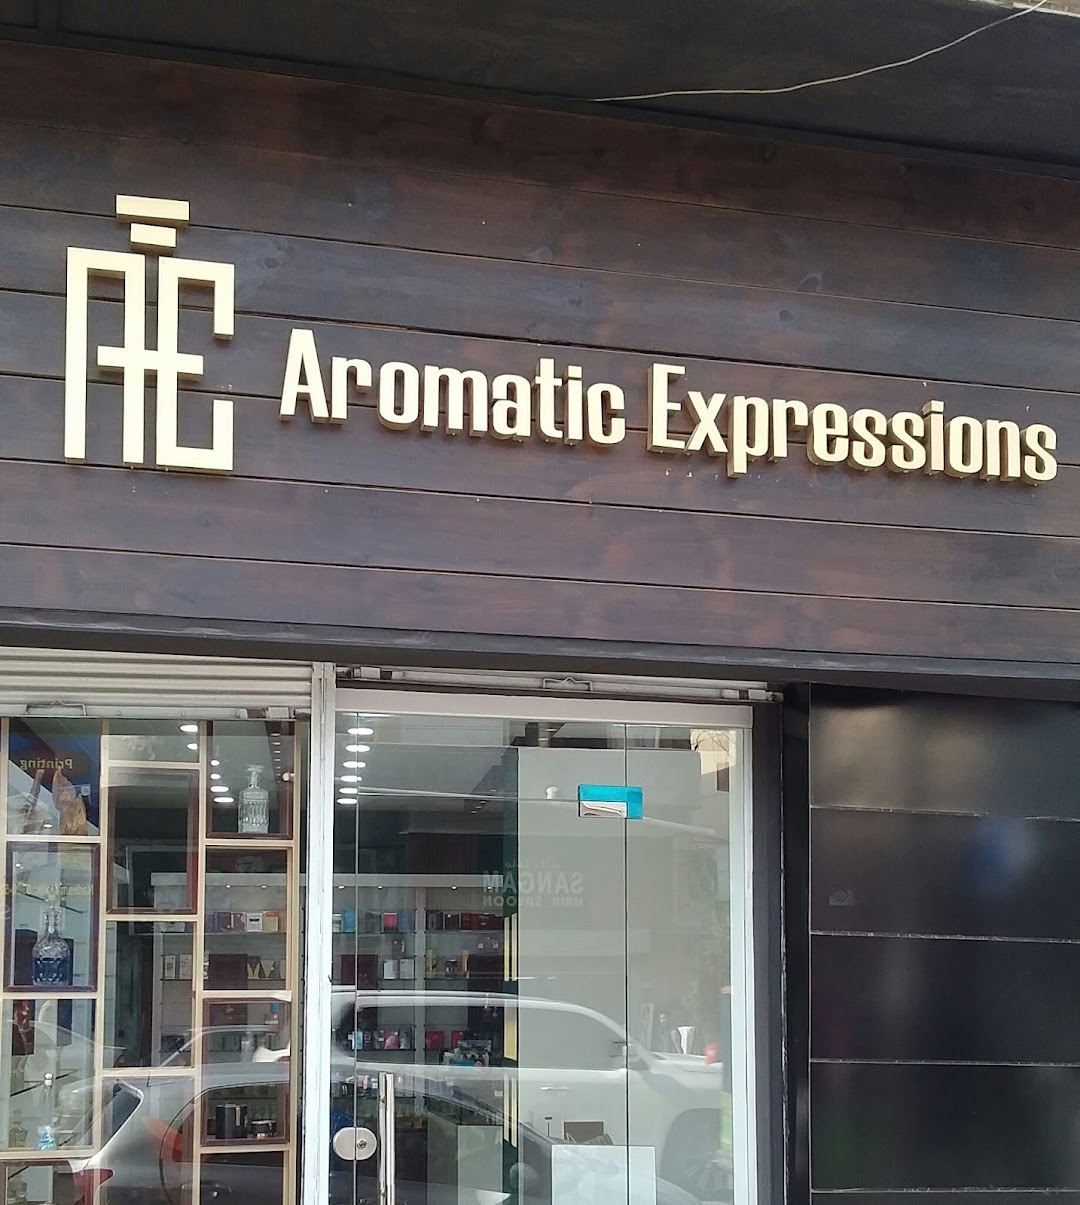 Aromatic Expressions